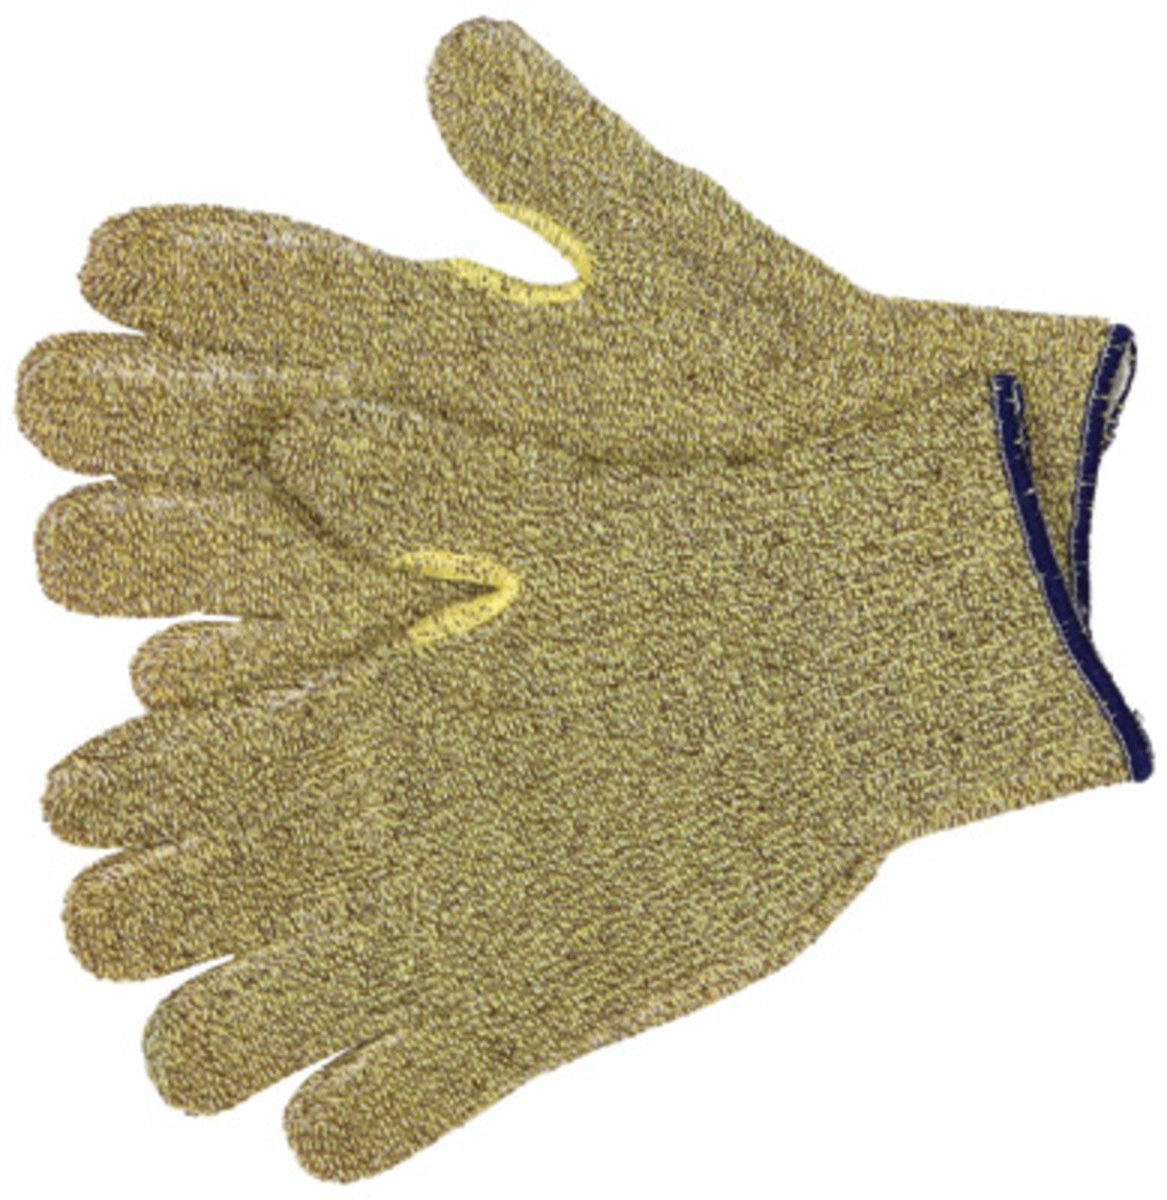 Memphis Glove Large Brown And Yellow 7 Gauge Regular Weight Kevlar® Cotton Blend Terry Cloth Heat Resistant Gloves With Reinforc